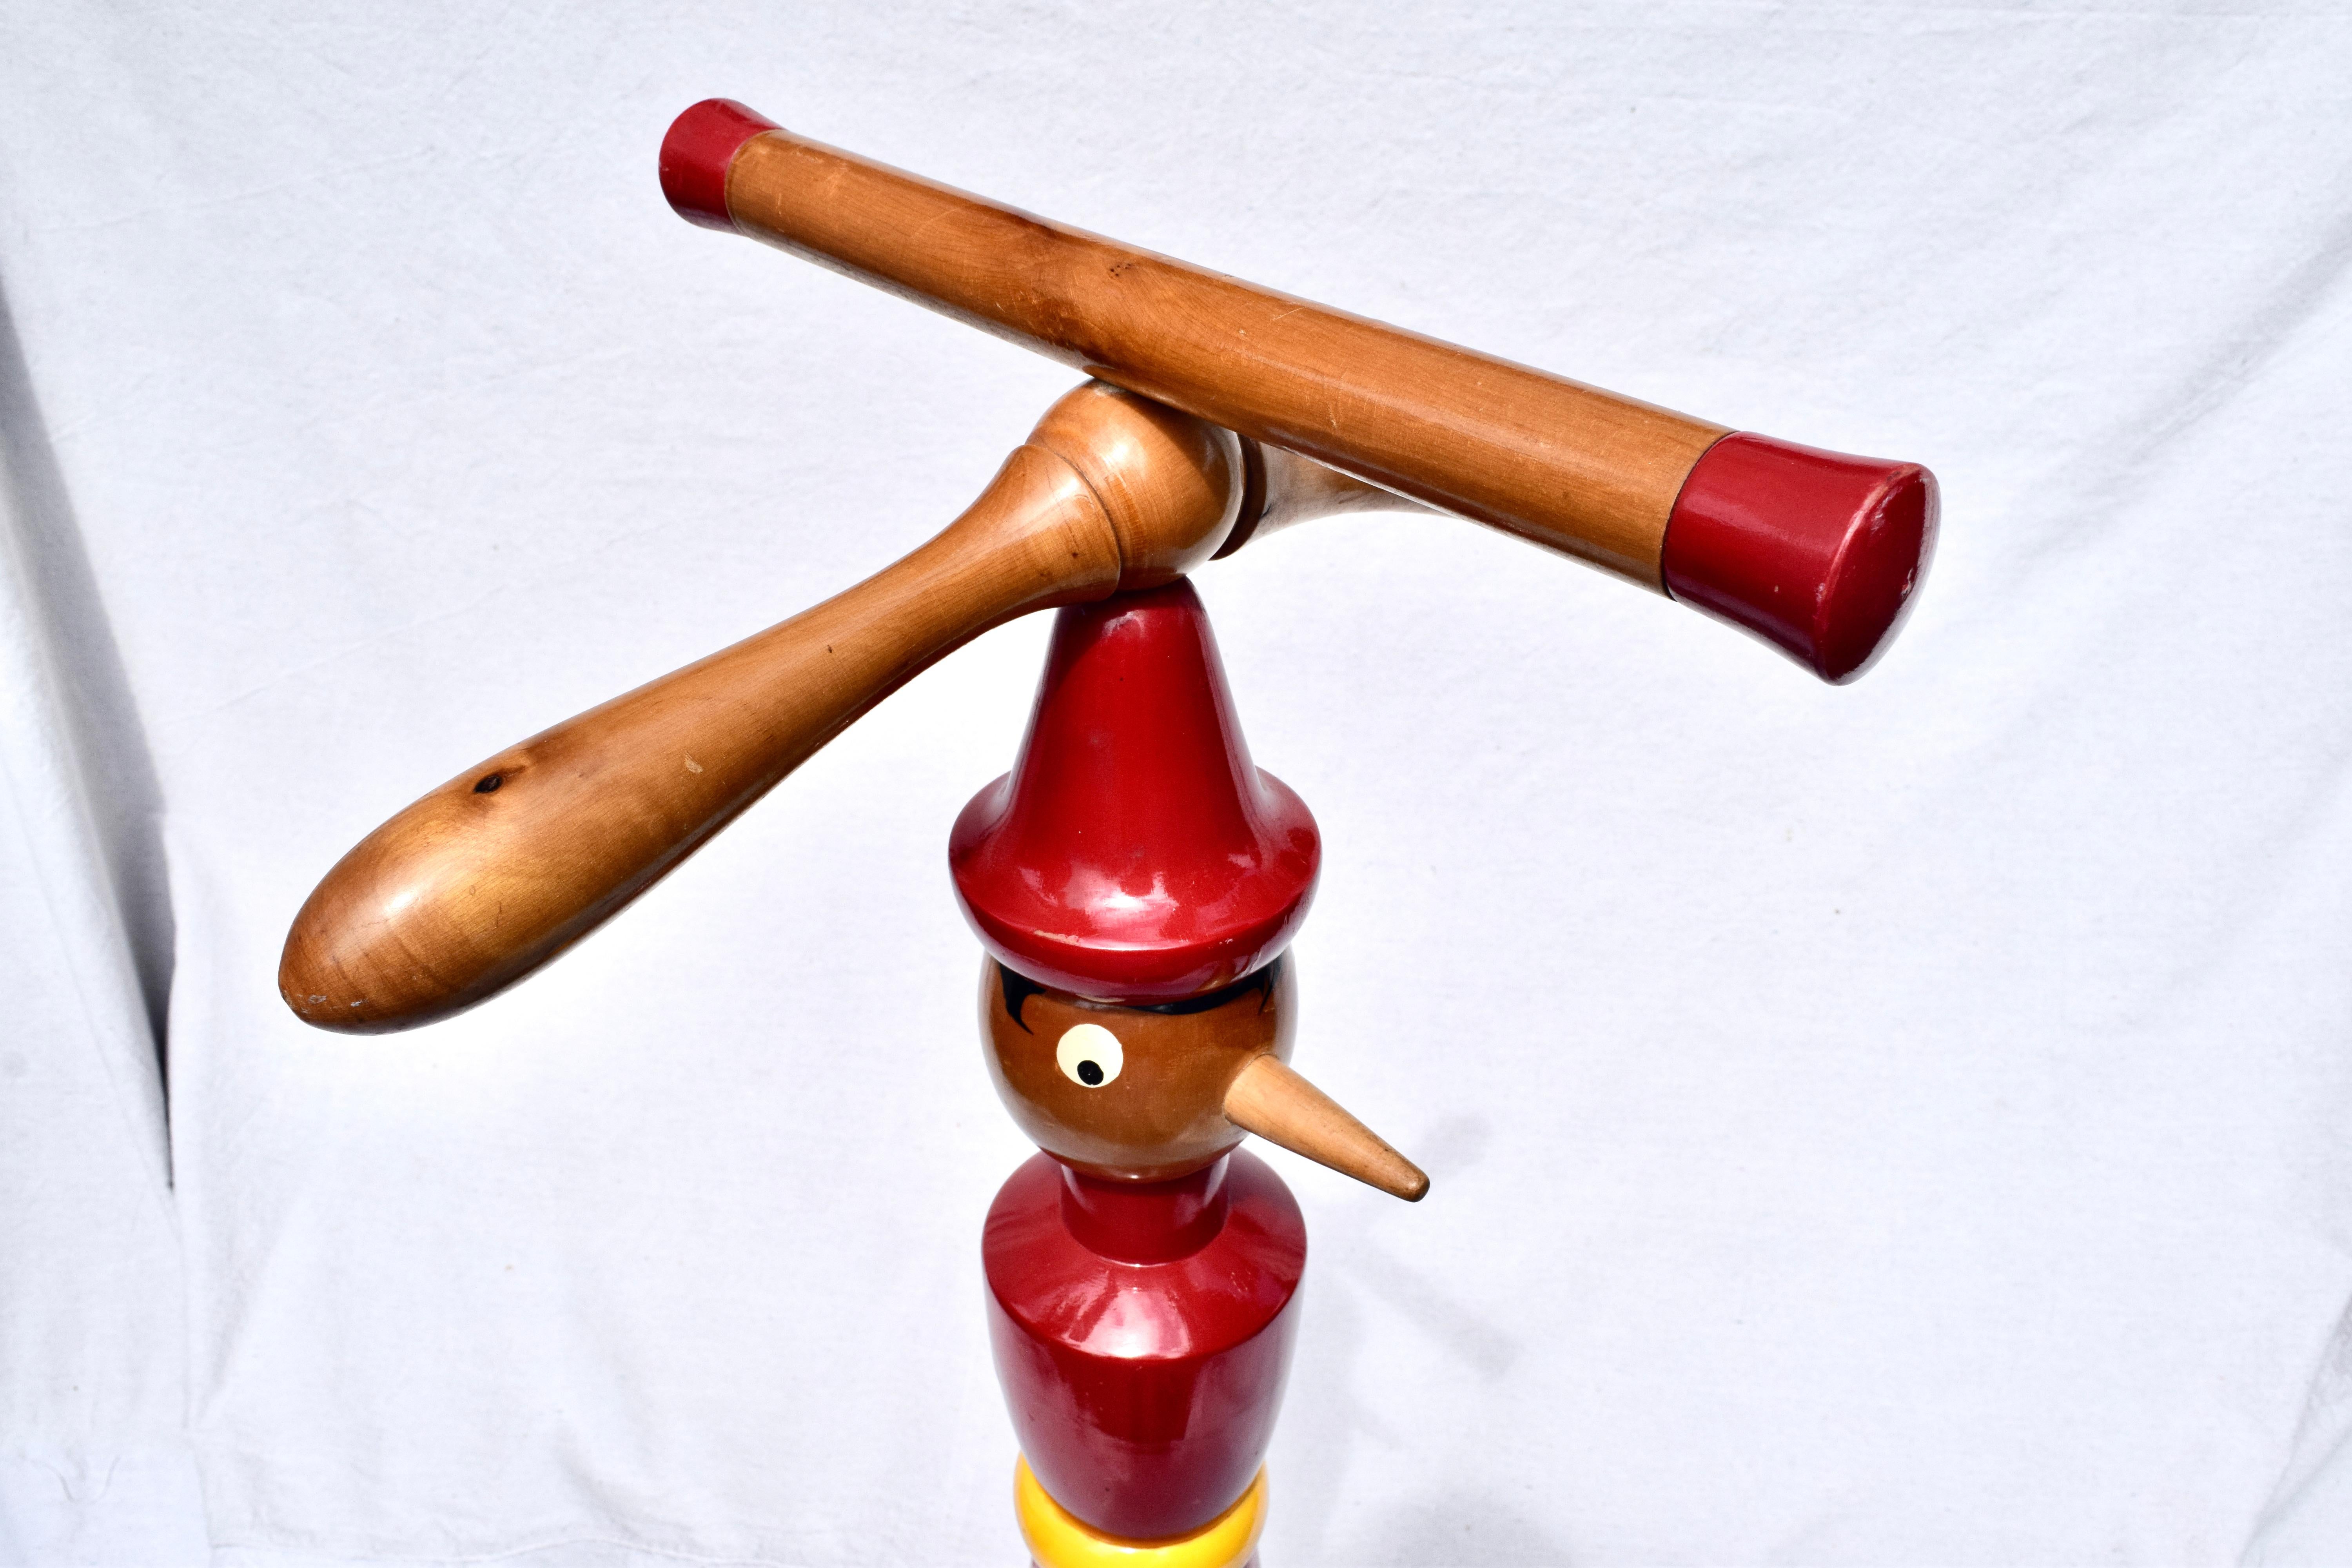 Lacquered Valet Stands Pinocchio & Jiminy Cricket, 1940s Italian Design For Sale